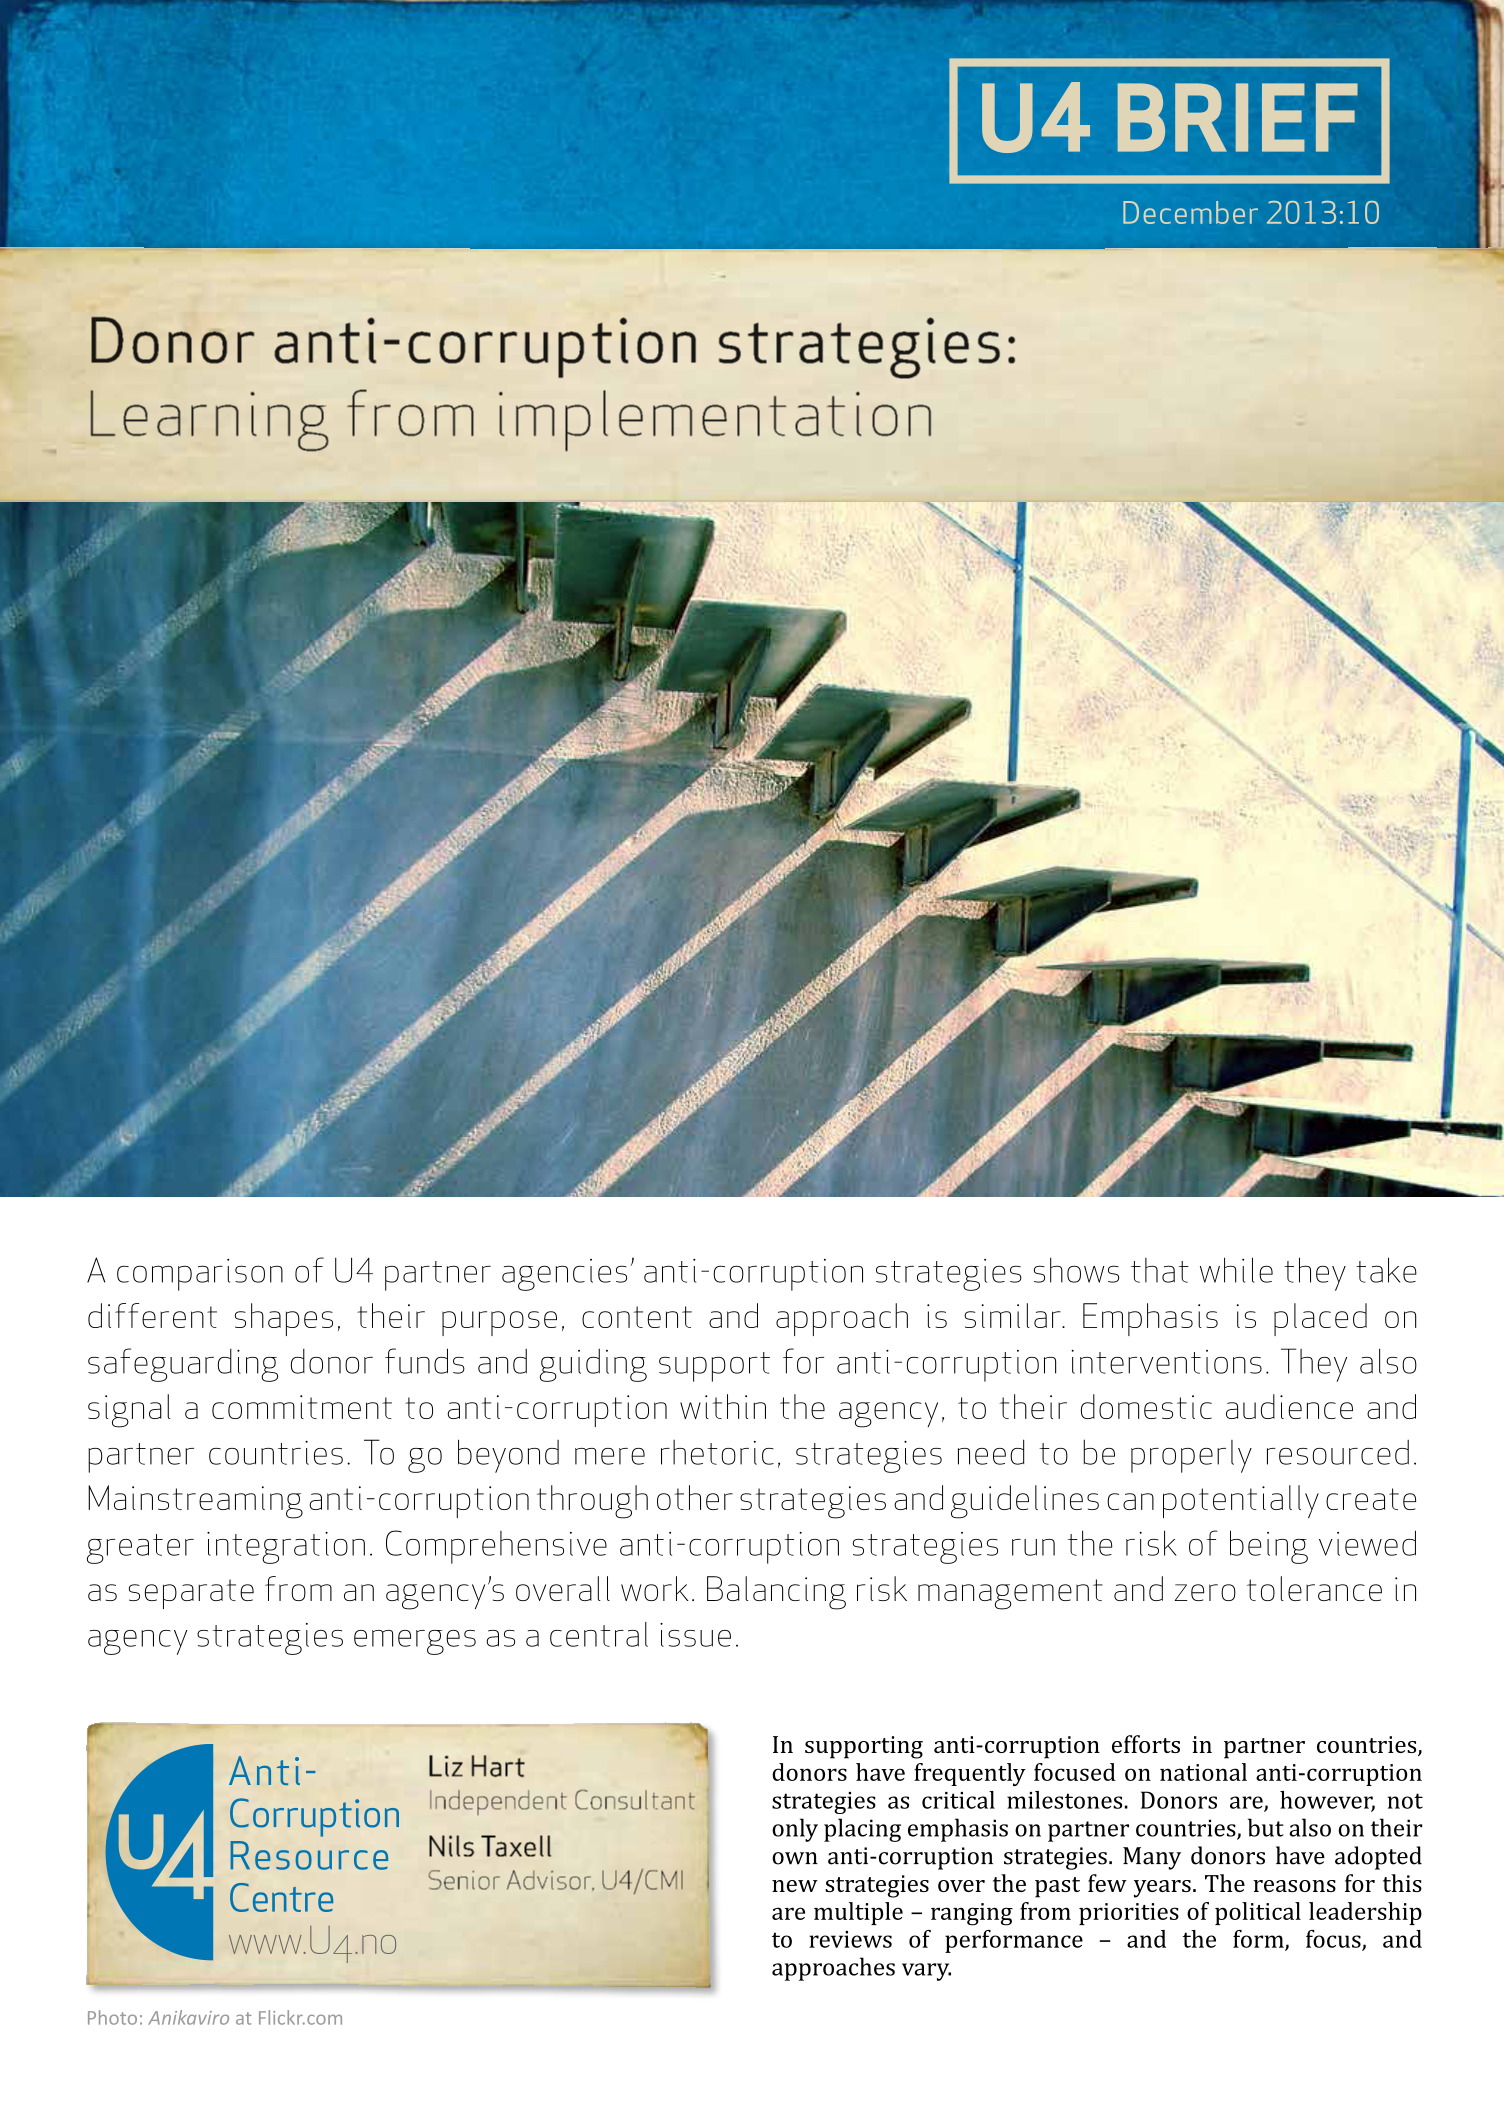 Donor anti-corruption strategies: Learning from implementation